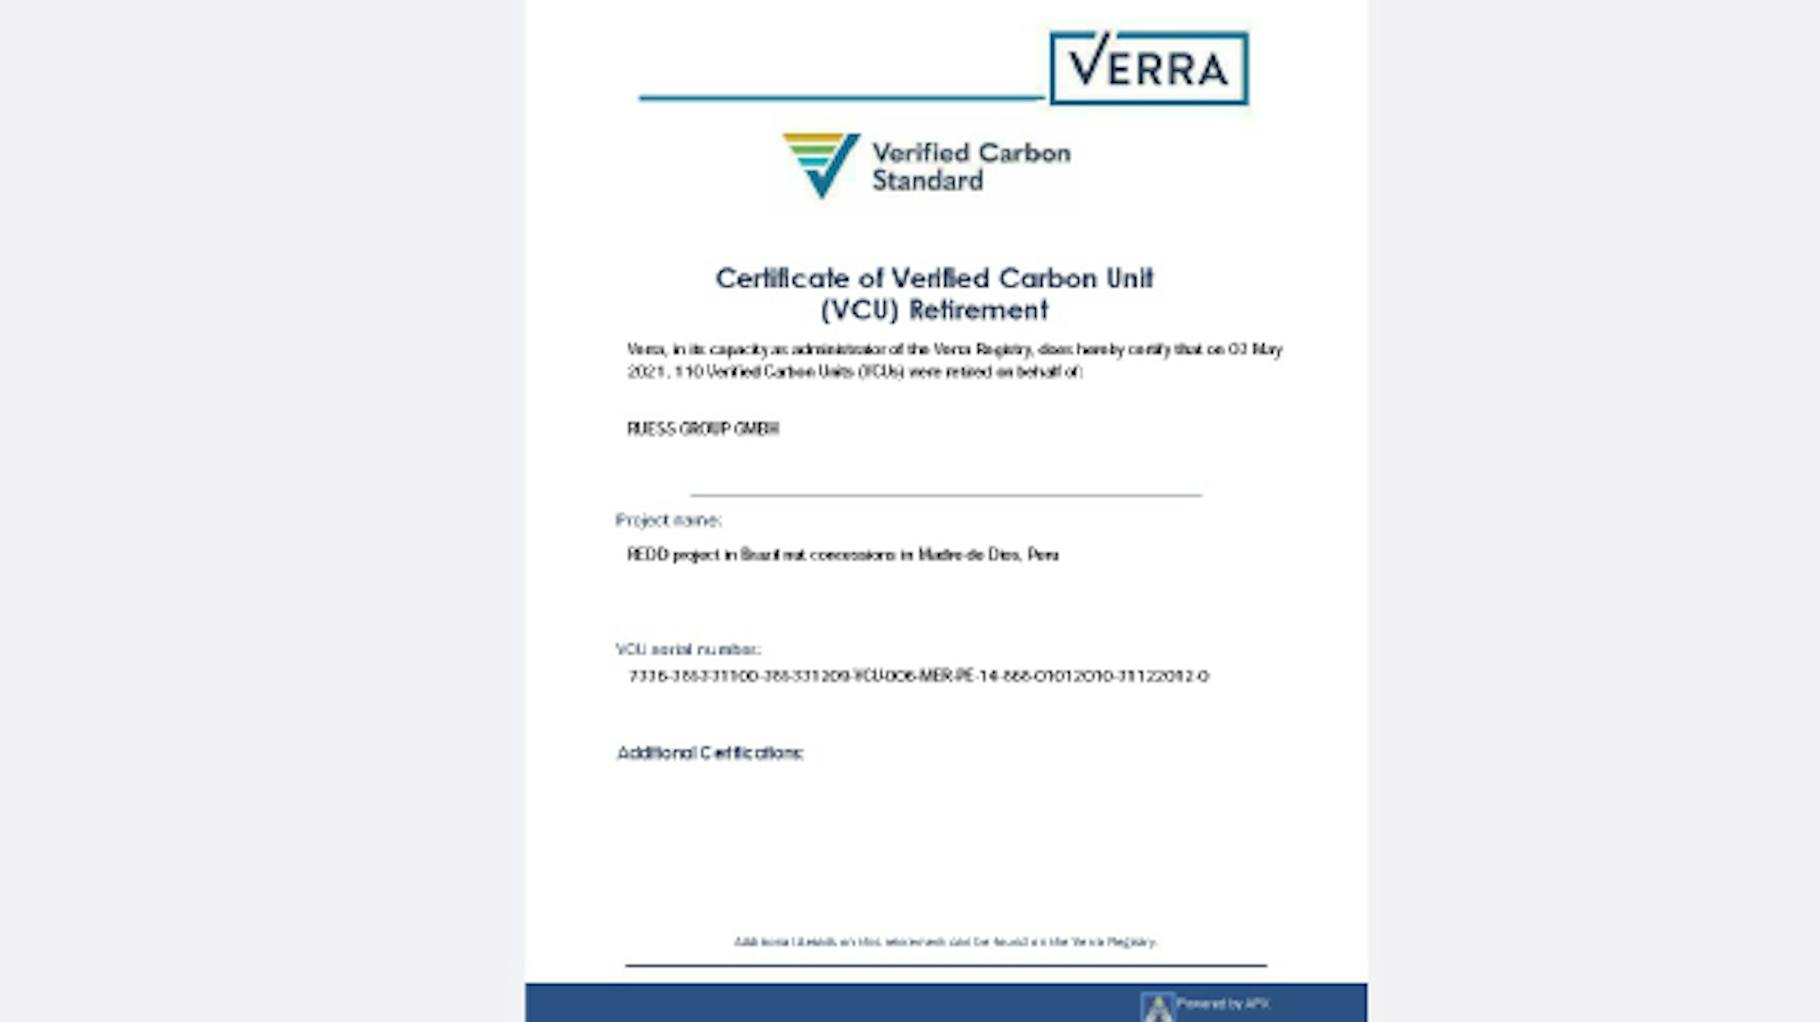 Certificate that the company is climate-neutral, which is a sustainability strategy